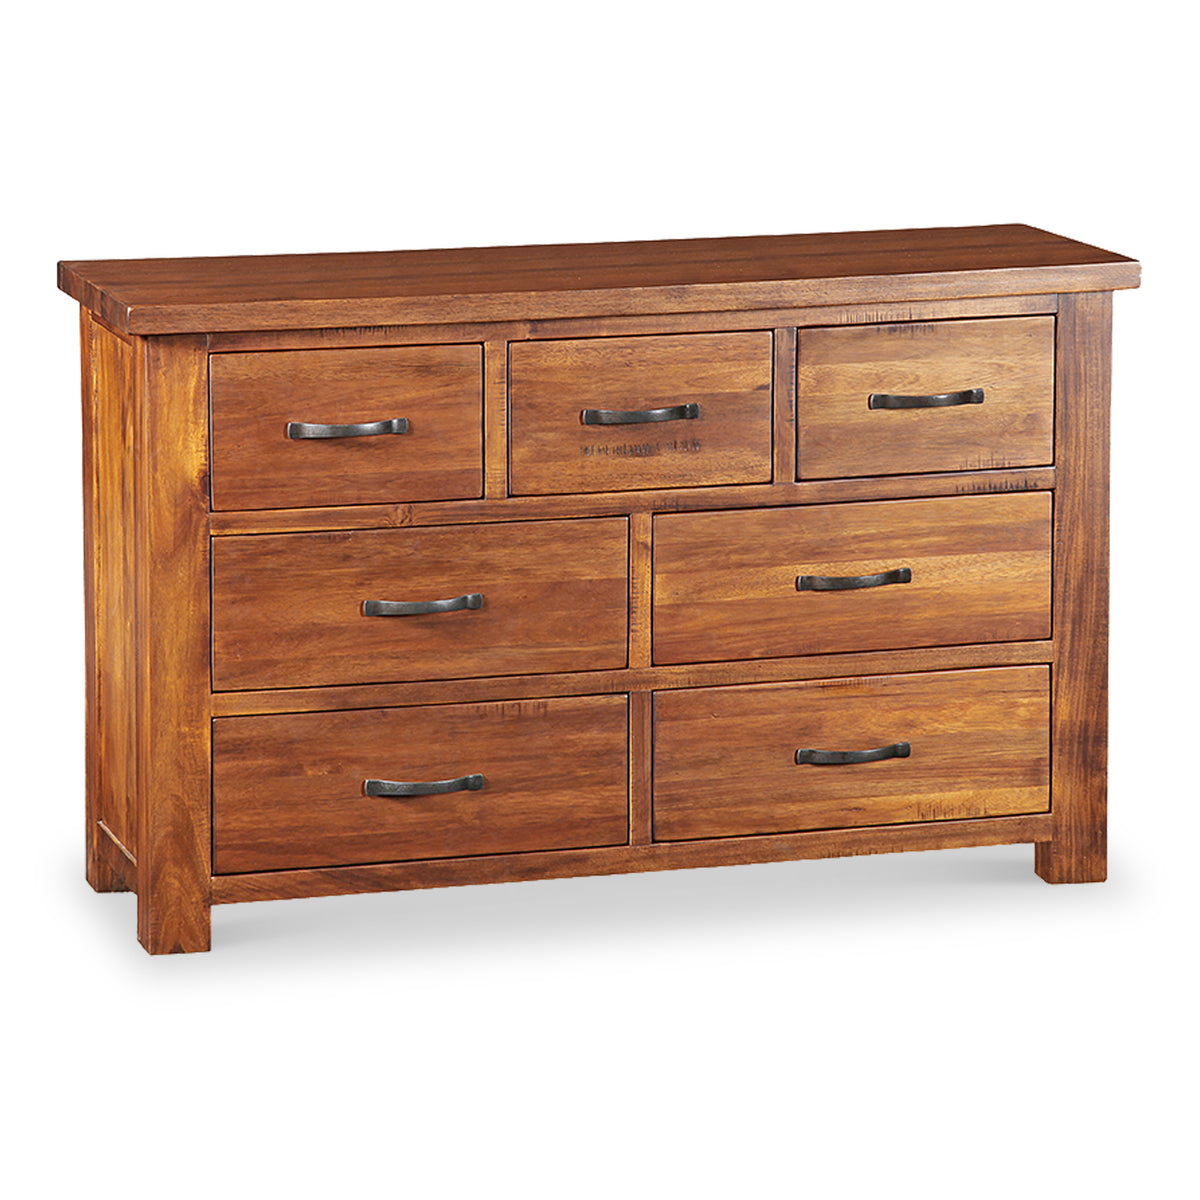 Ladock 3 Over 4 Chest of Drawers from Roseland Furniture